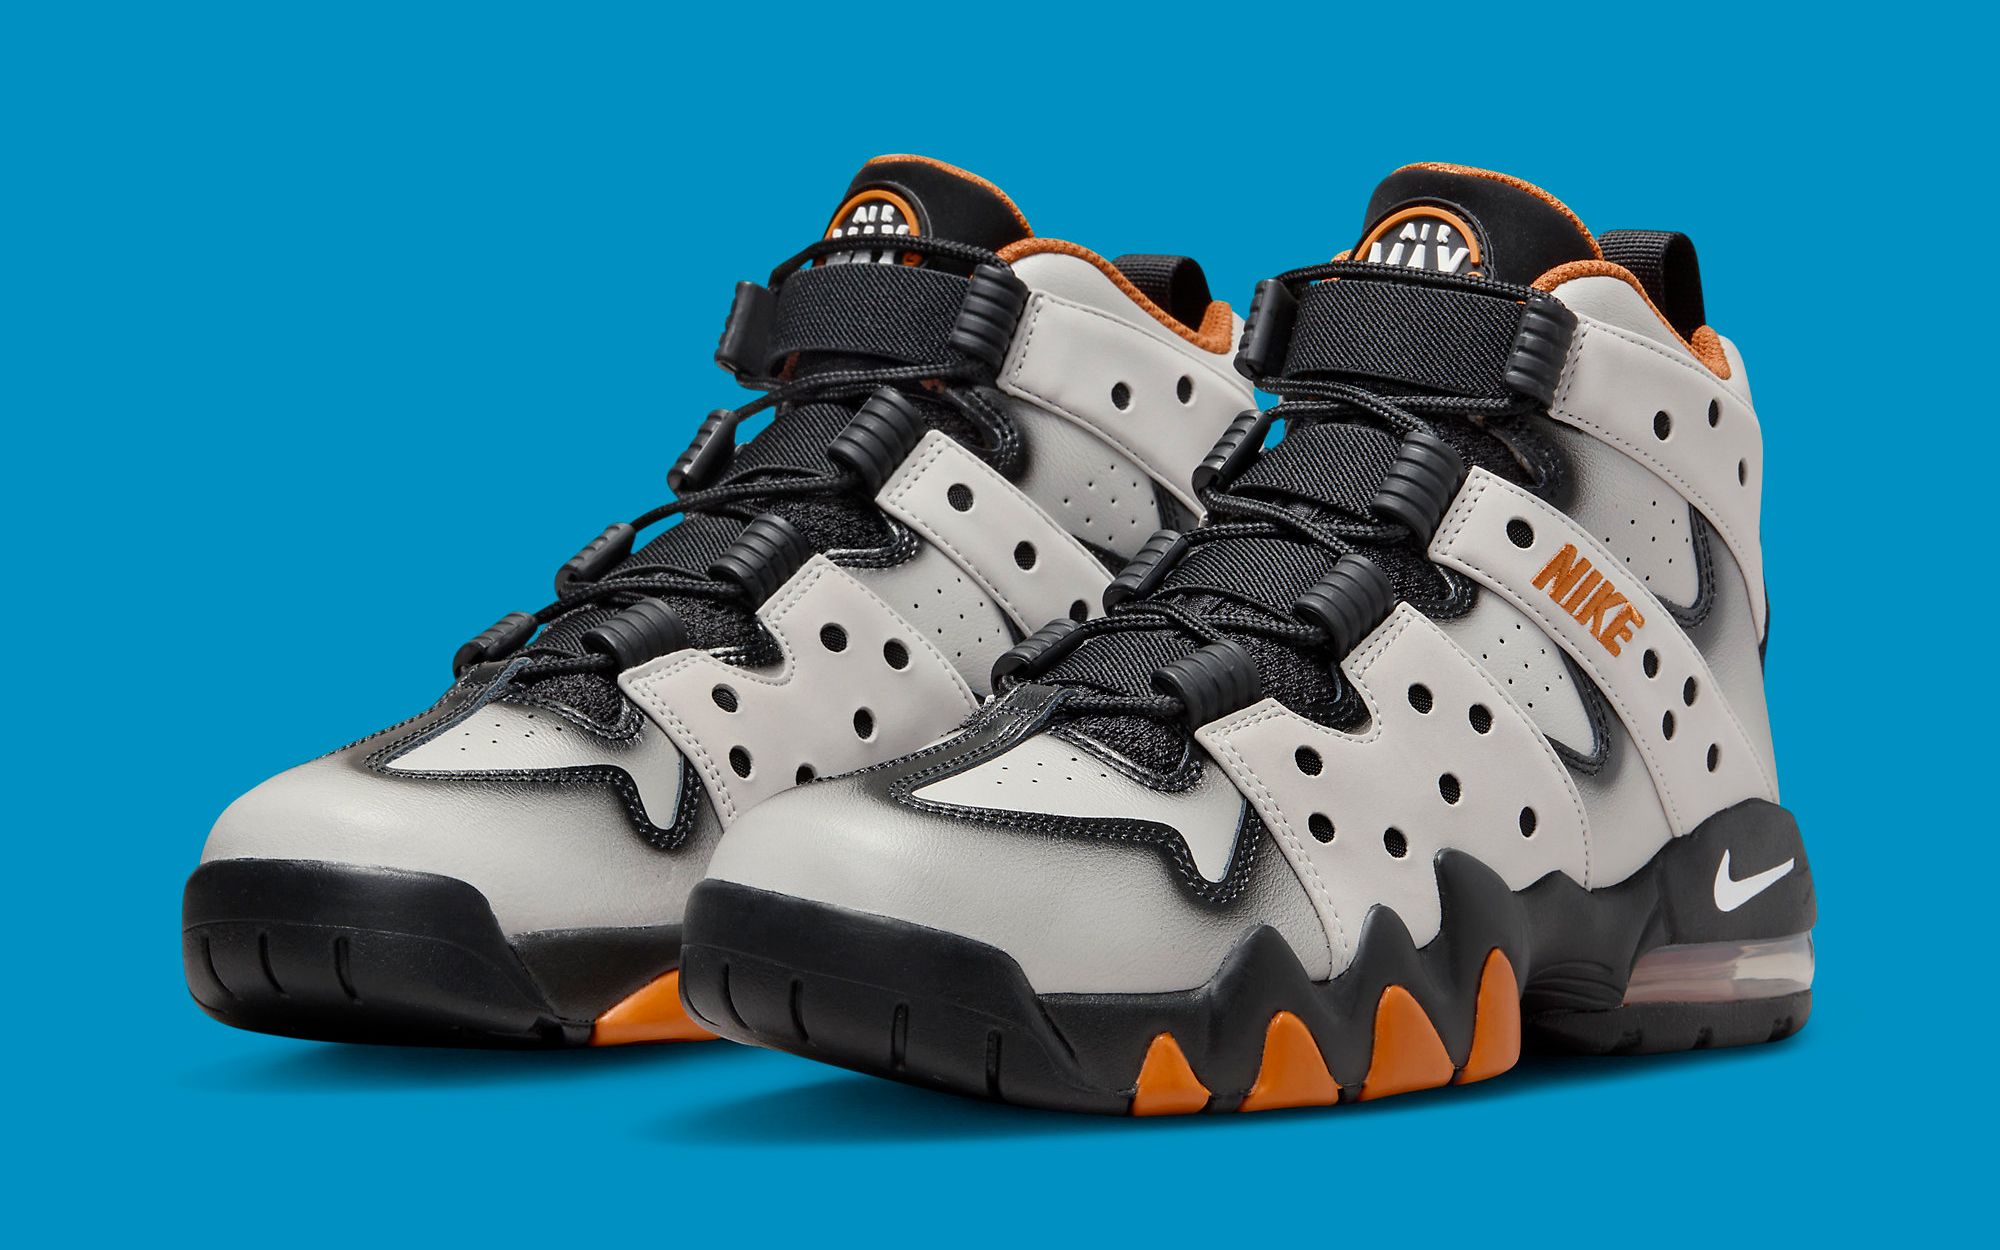 See How the Nike Air Max2 CB 94 Retro Looks On-Feet